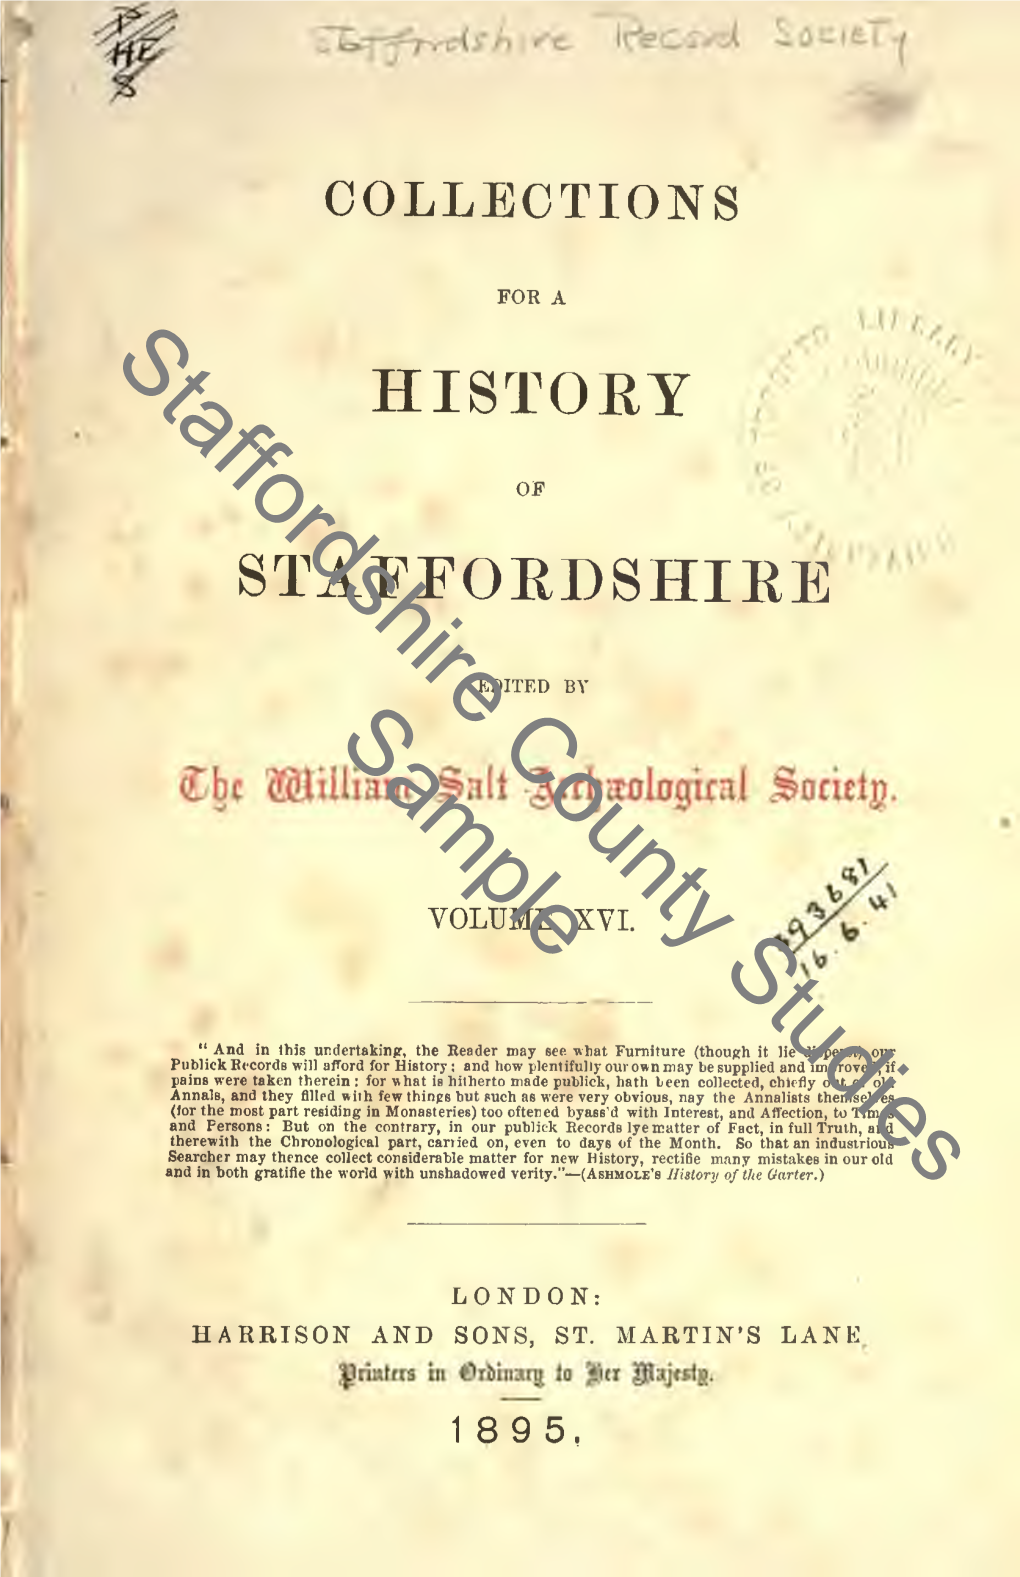 Collections for a History of Staffordshire, 1895